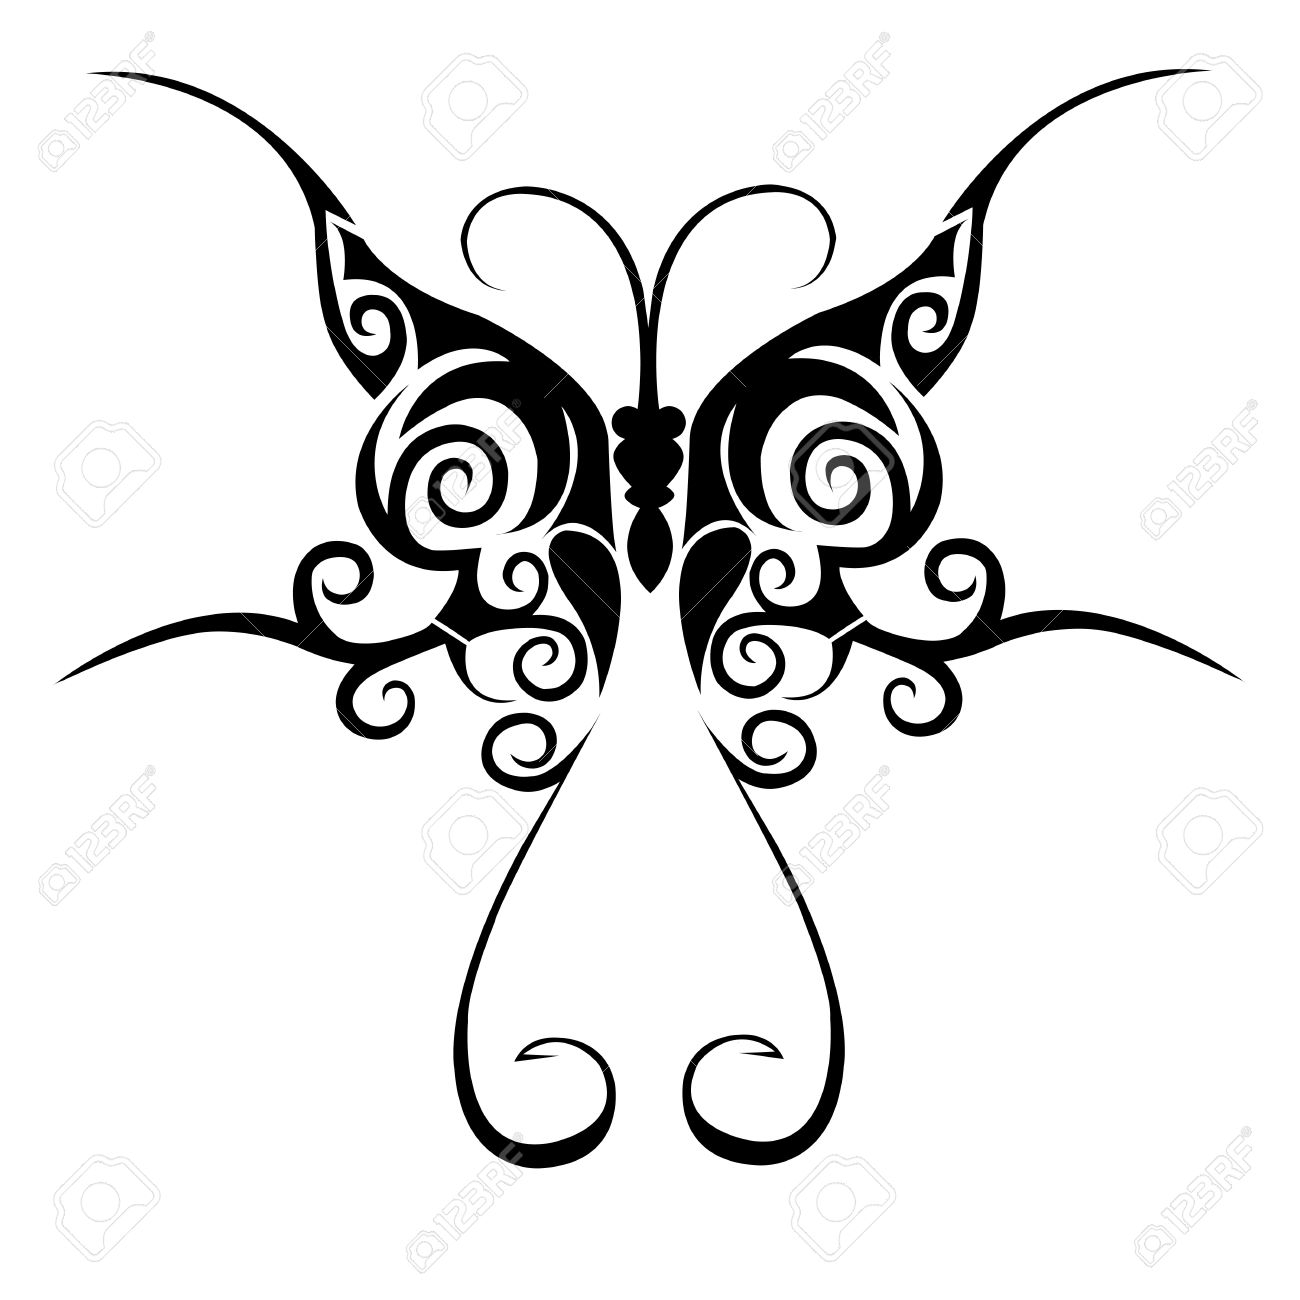 Tribal Butterfly Tattoo Royalty Free Cliparts Vectors And Stock within size 1300 X 1300